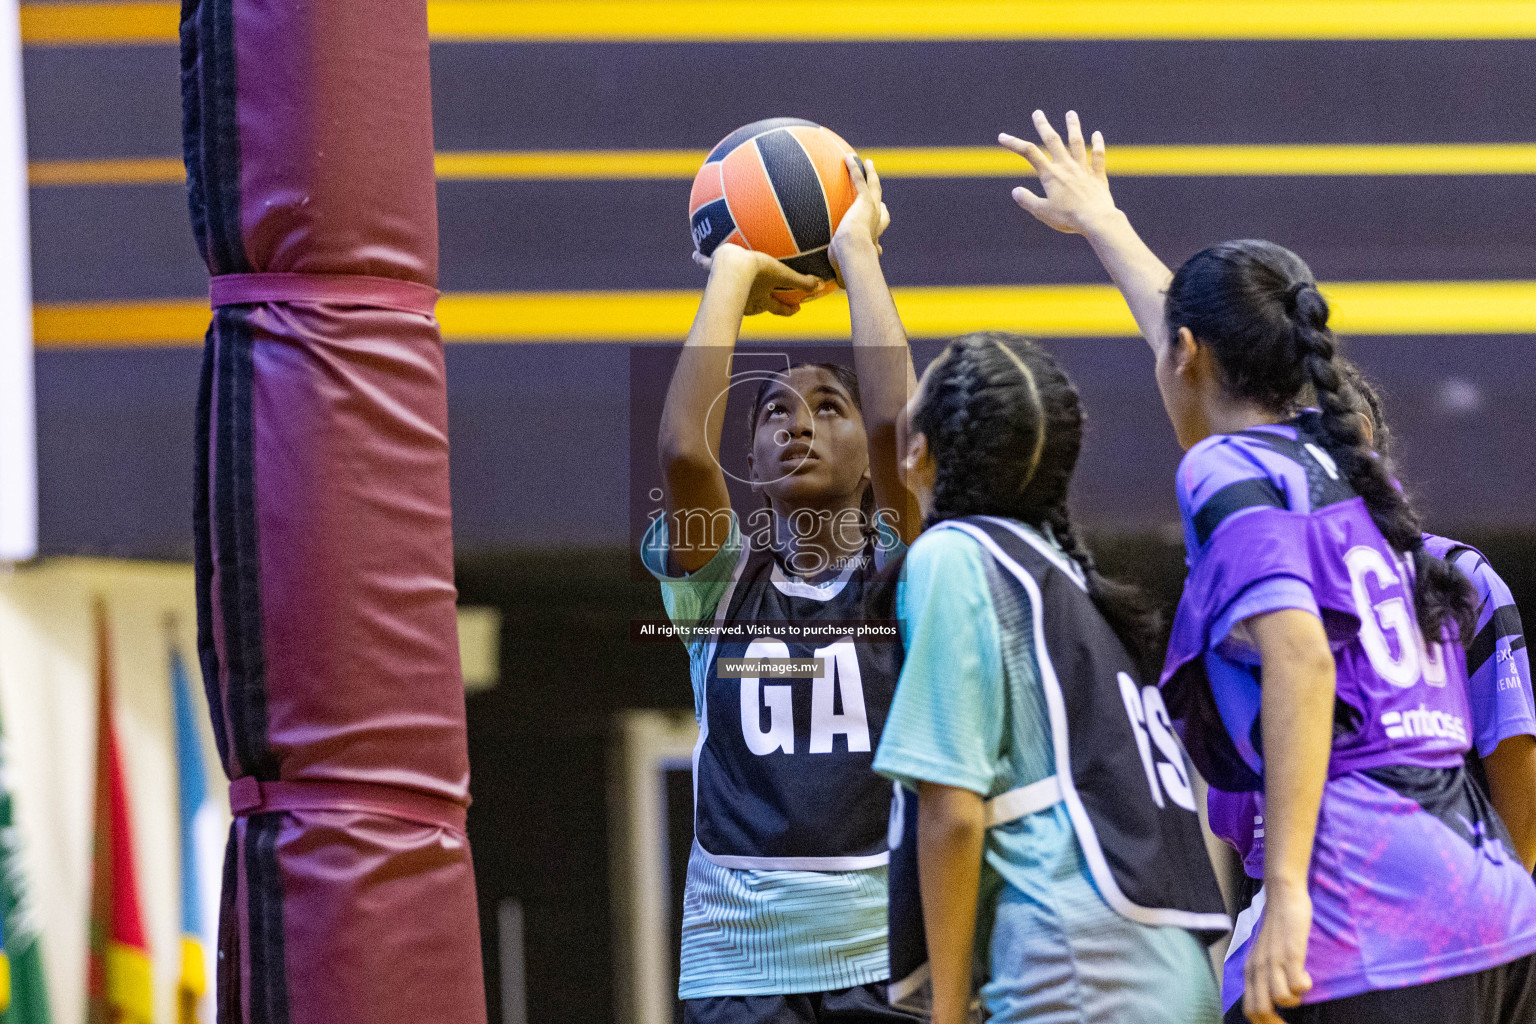 Day 11 of 24th Interschool Netball Tournament 2023 was held in Social Center, Male', Maldives on 6th November 2023. Photos: Nausham Waheed / images.mv